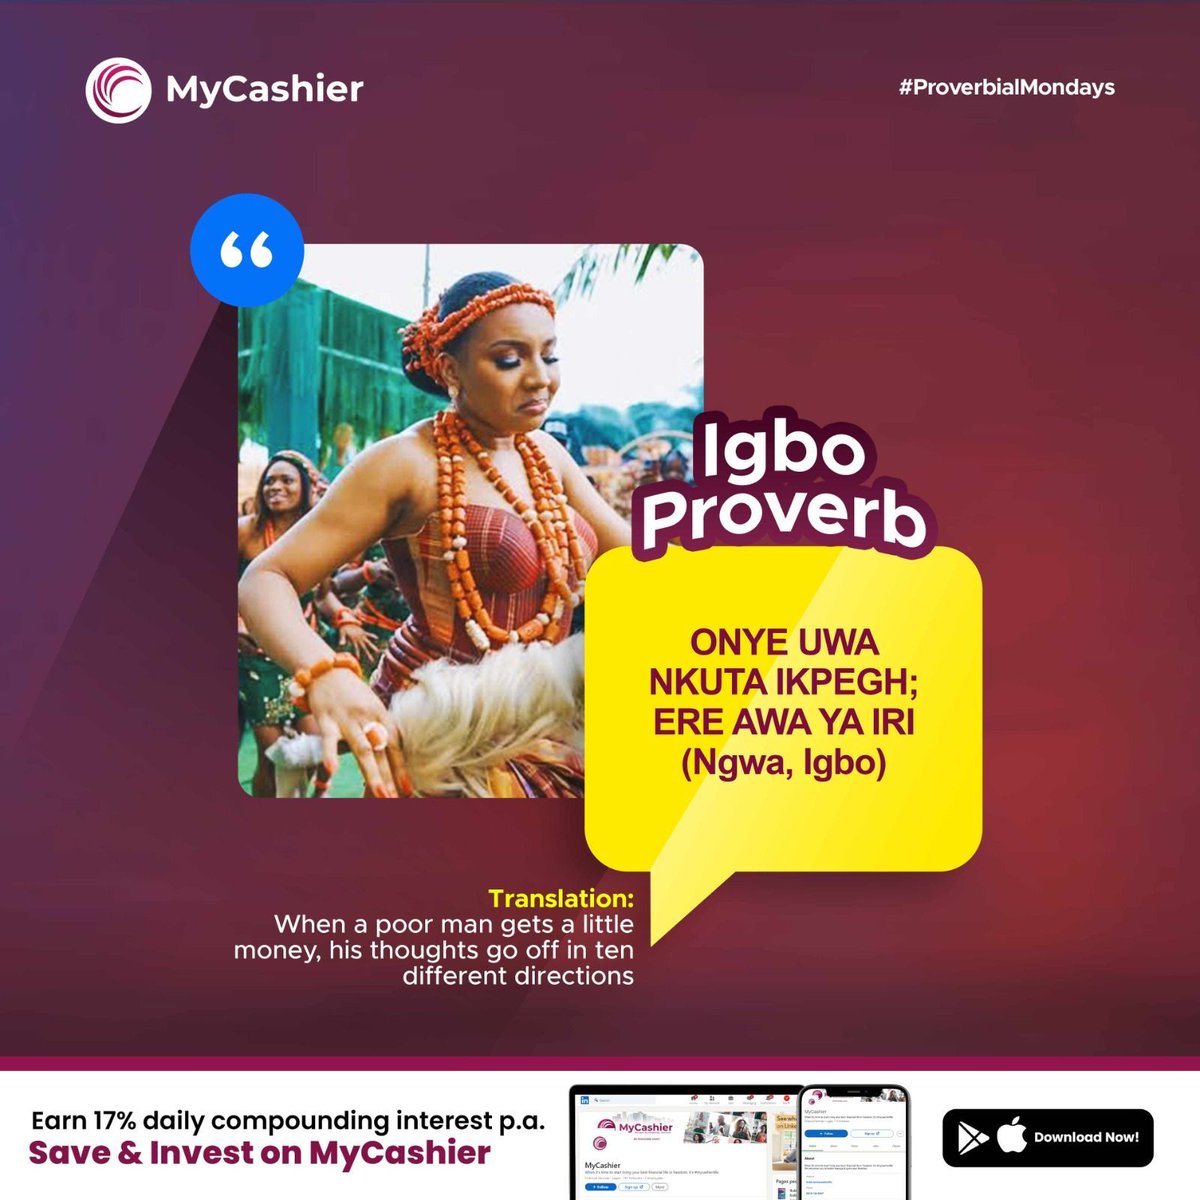 Making money is great, but it can be easy to spend it all on instant gratification. That's why saving requires a wise approach, not just a high income.

Download MyCashier App and start saving today,

#mycashierlife #savings #personalfinance #nigeria